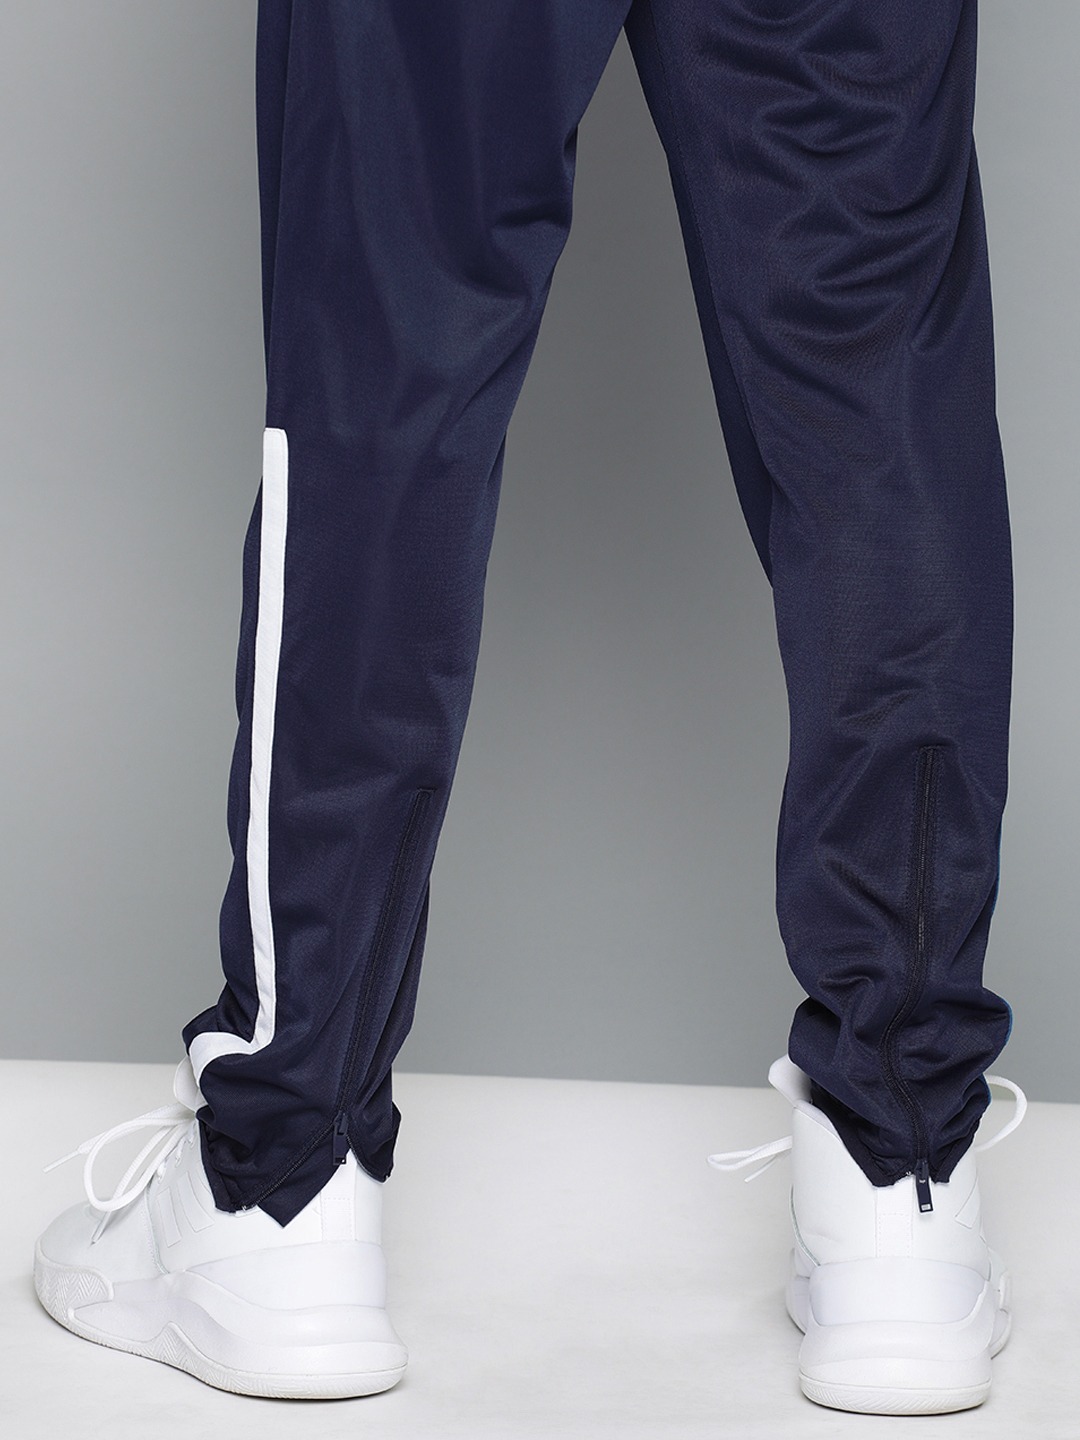 Clothing Tracksuits | HRX by Hrithik Roshan Men Navy blue & White Colourblocked Rapid-Dry Basketball Tracksuits - QW57672